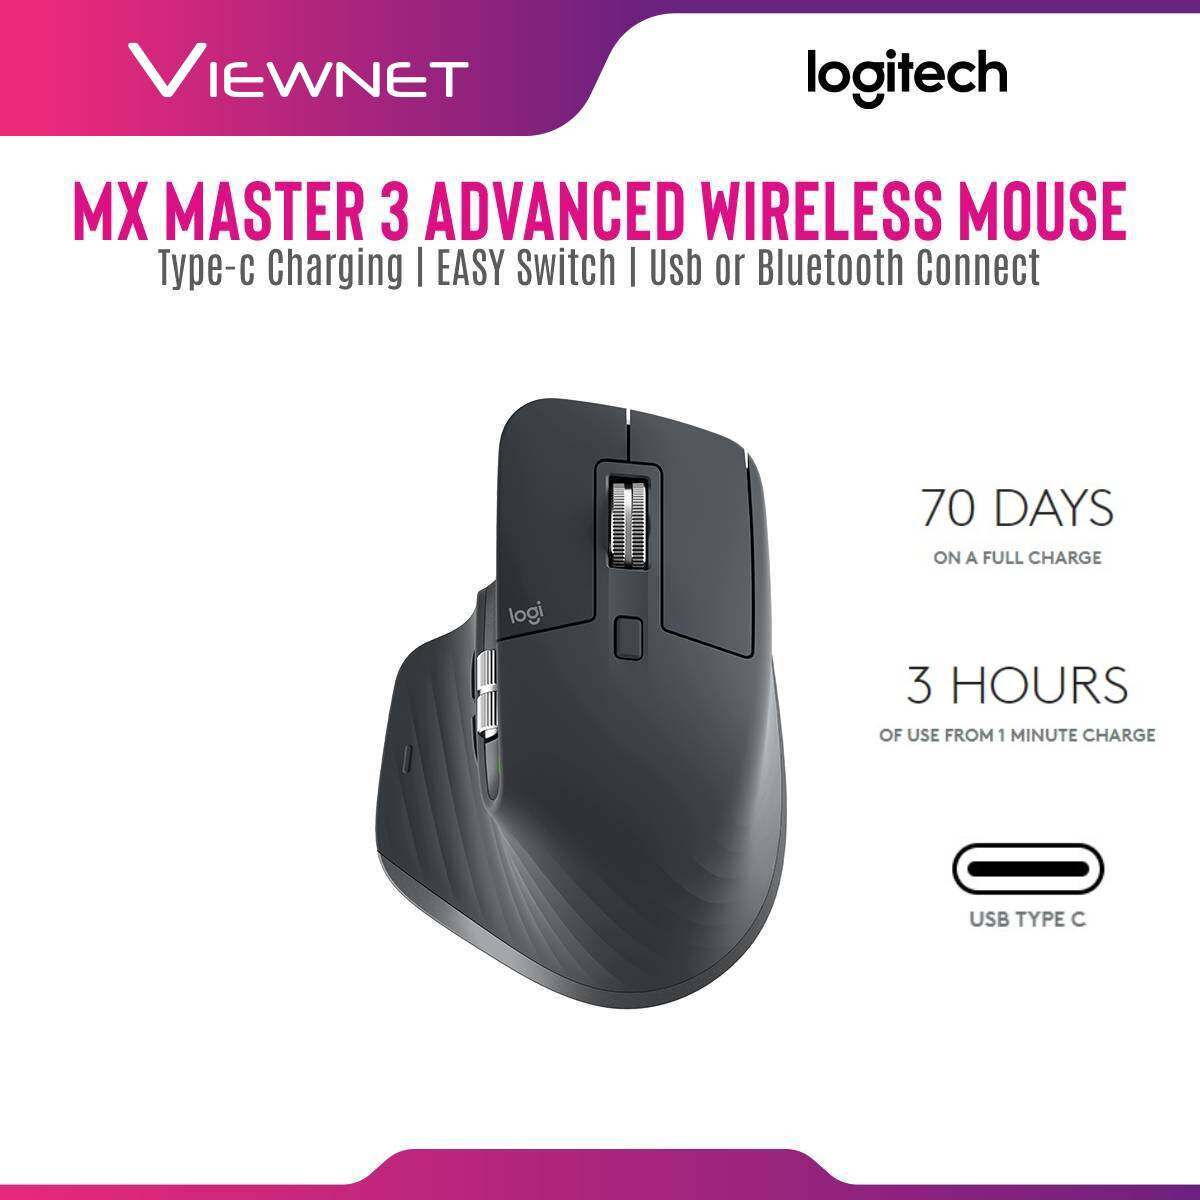 Logitech MX Master 3S / Master 3 Advanced Wireless Mouse with 2.4GHz Wireless and Bluetooth Connection, Shift Scroll Wheel, Multi OS Compatible, Easy-Switch Between 3 Devices